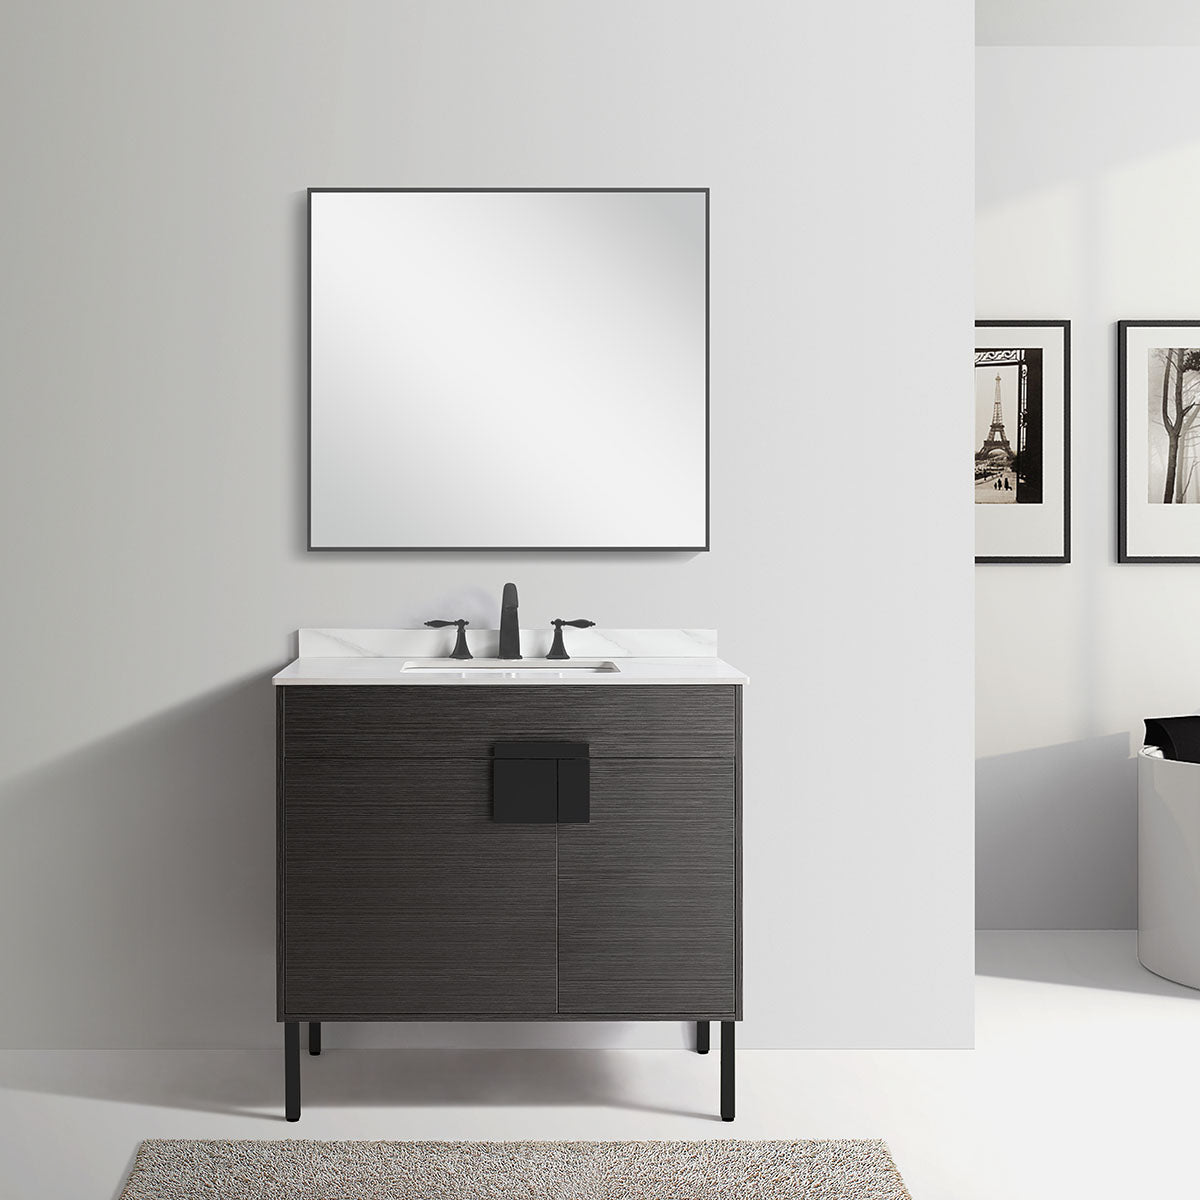 36" Vanity with Sintered Stone Countertop (Charcoal Grey) V9003 Series